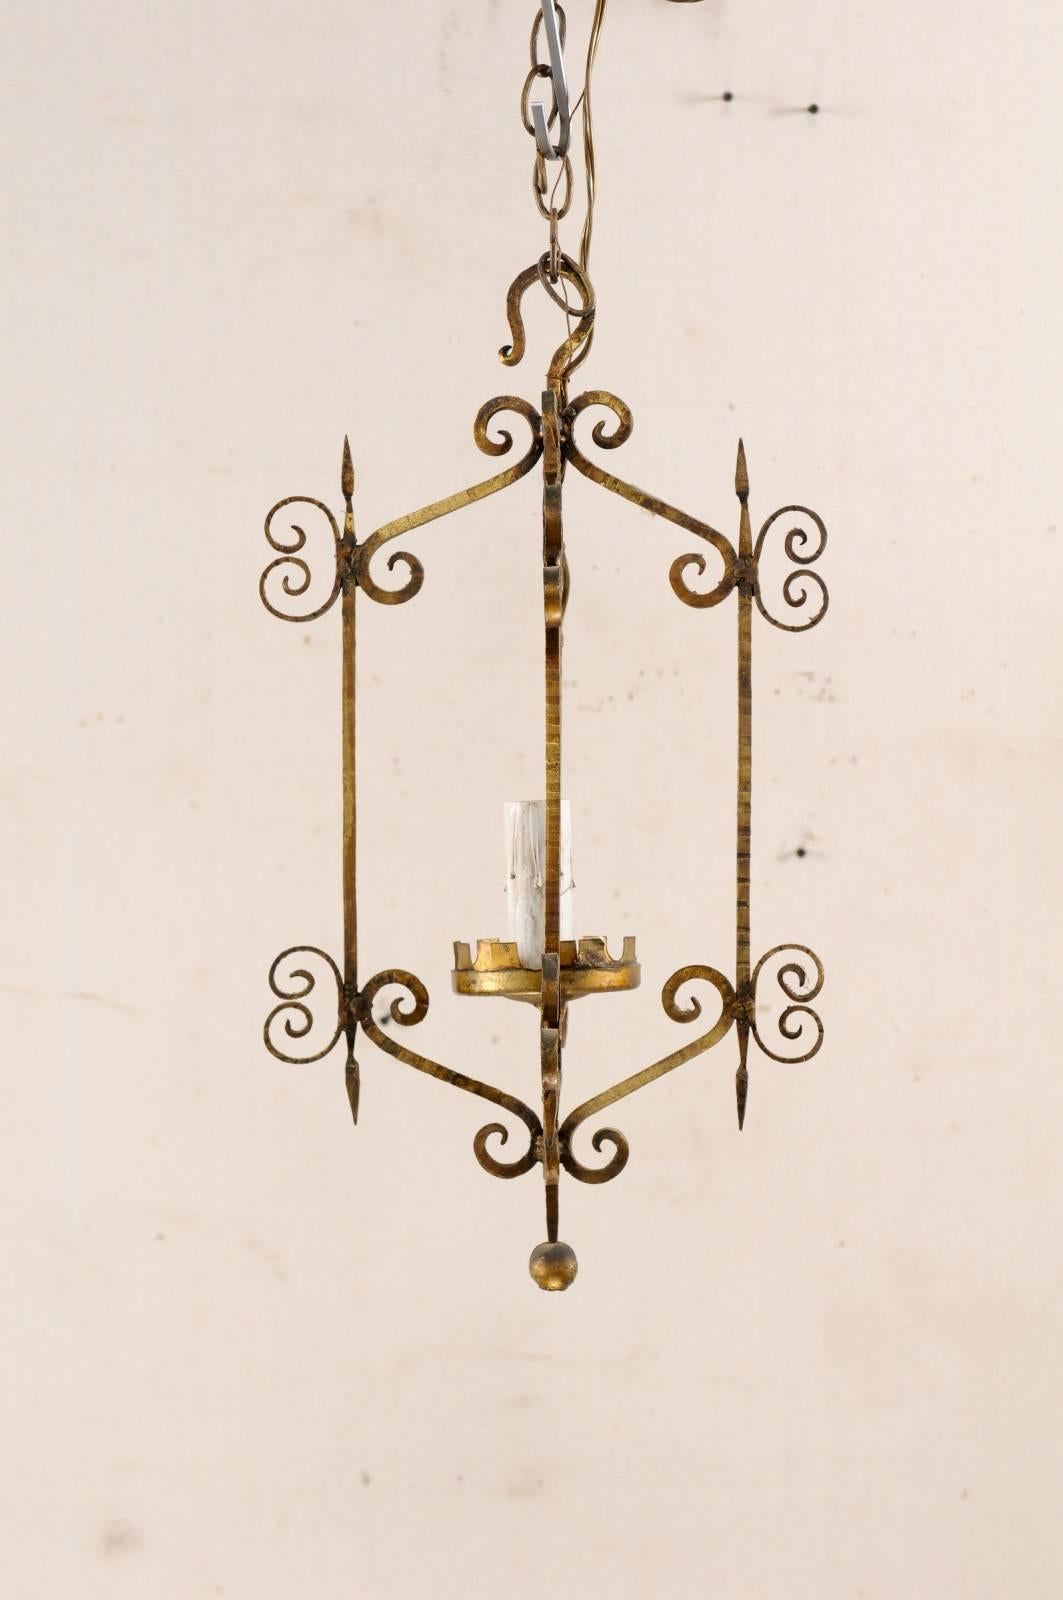 French Mid-20th Century Single Light Scrolled Iron Chandelier in Gold Bronze Hue For Sale 1